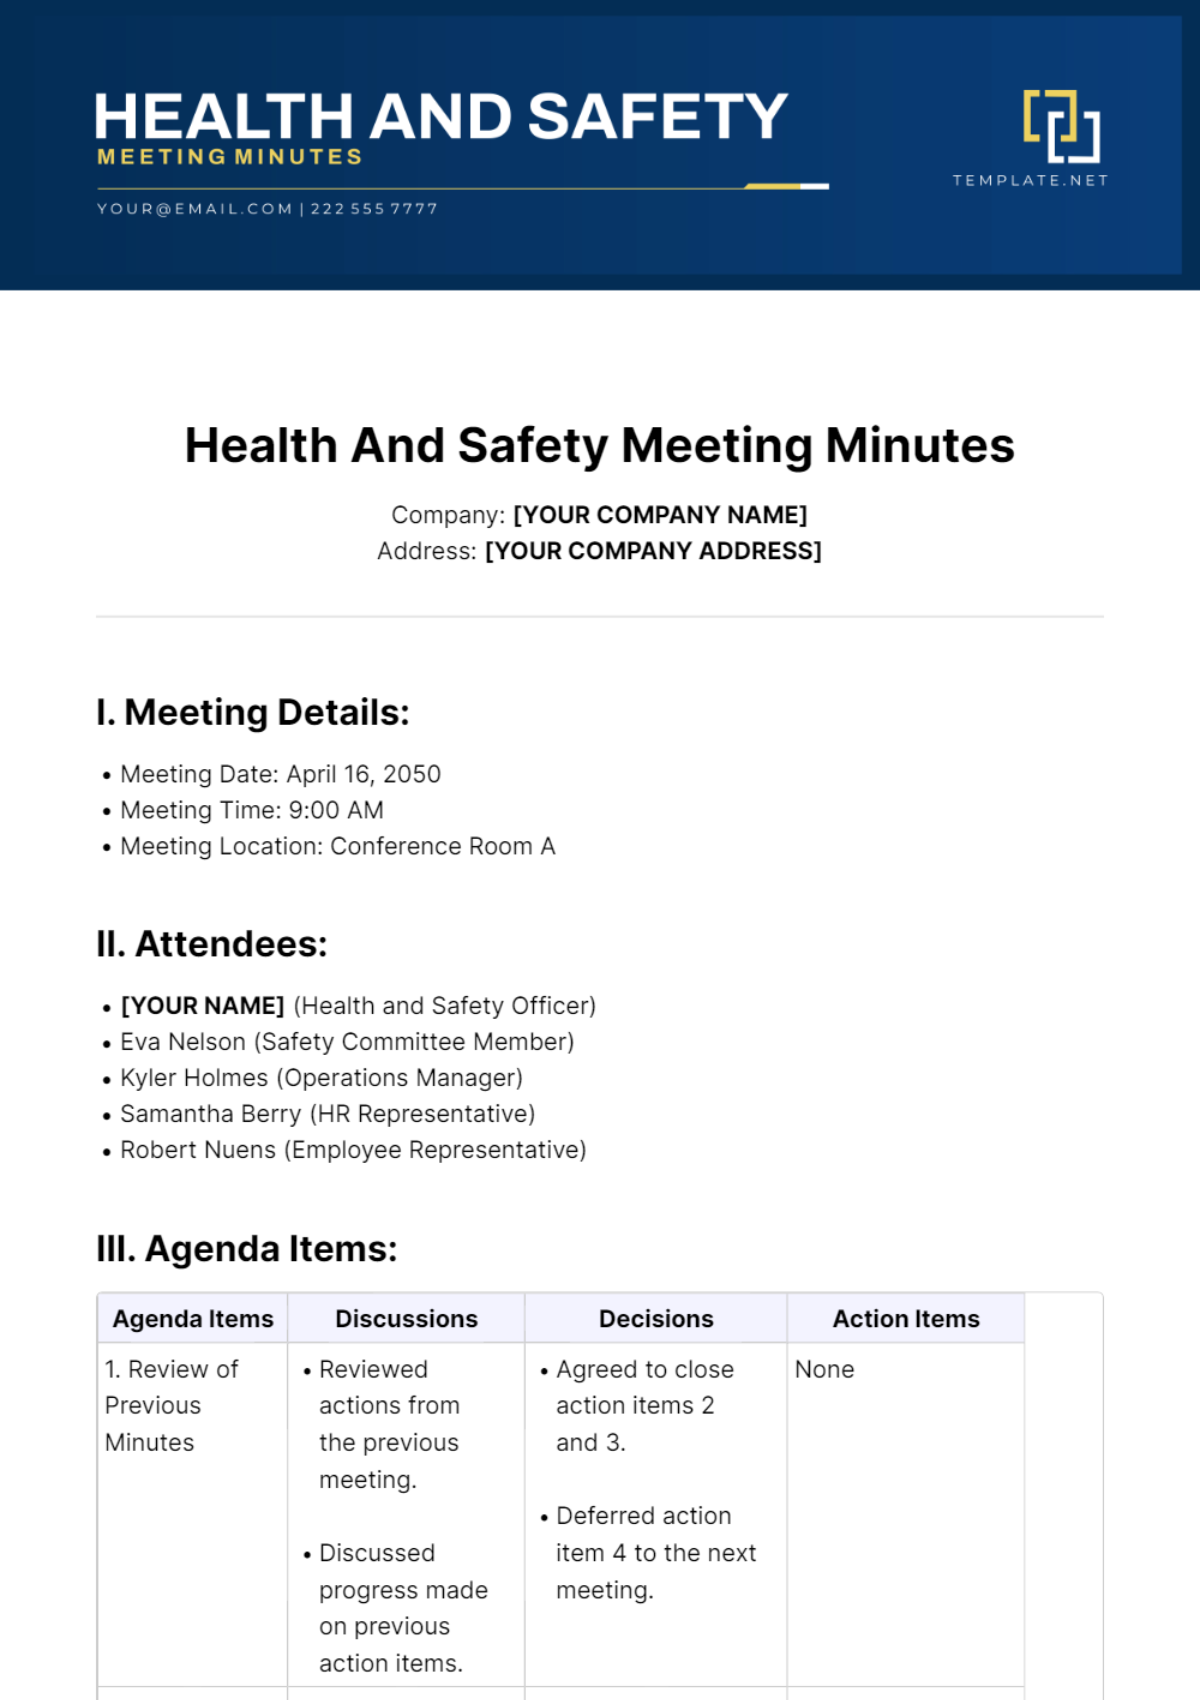 Health And Safety Meeting Minutes Template